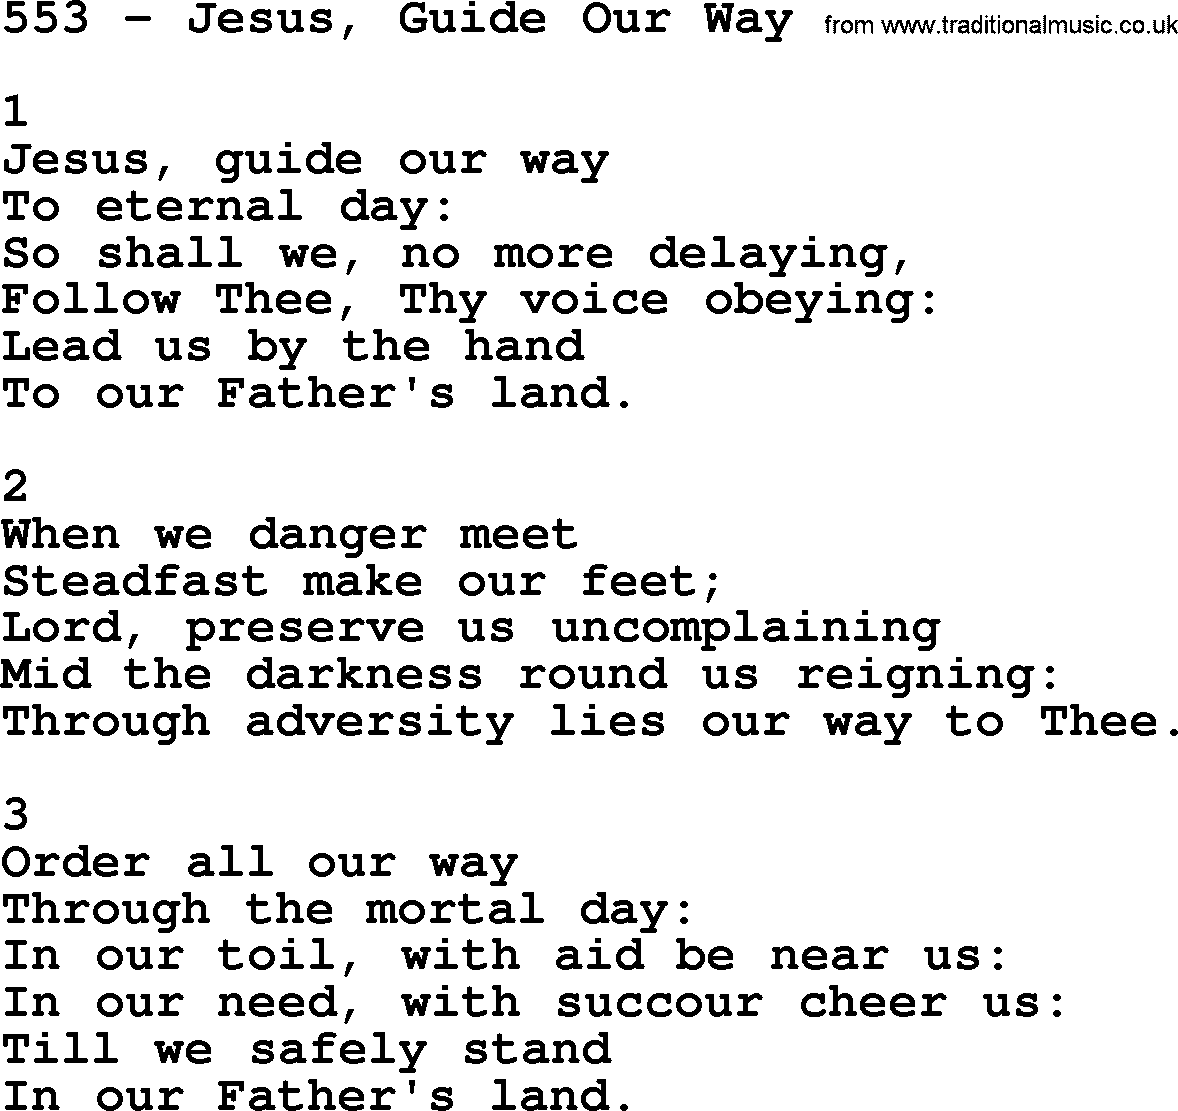 Complete Adventis Hymnal, title: 553-Jesus, Guide Our Way, with lyrics, midi, mp3, powerpoints(PPT) and PDF,